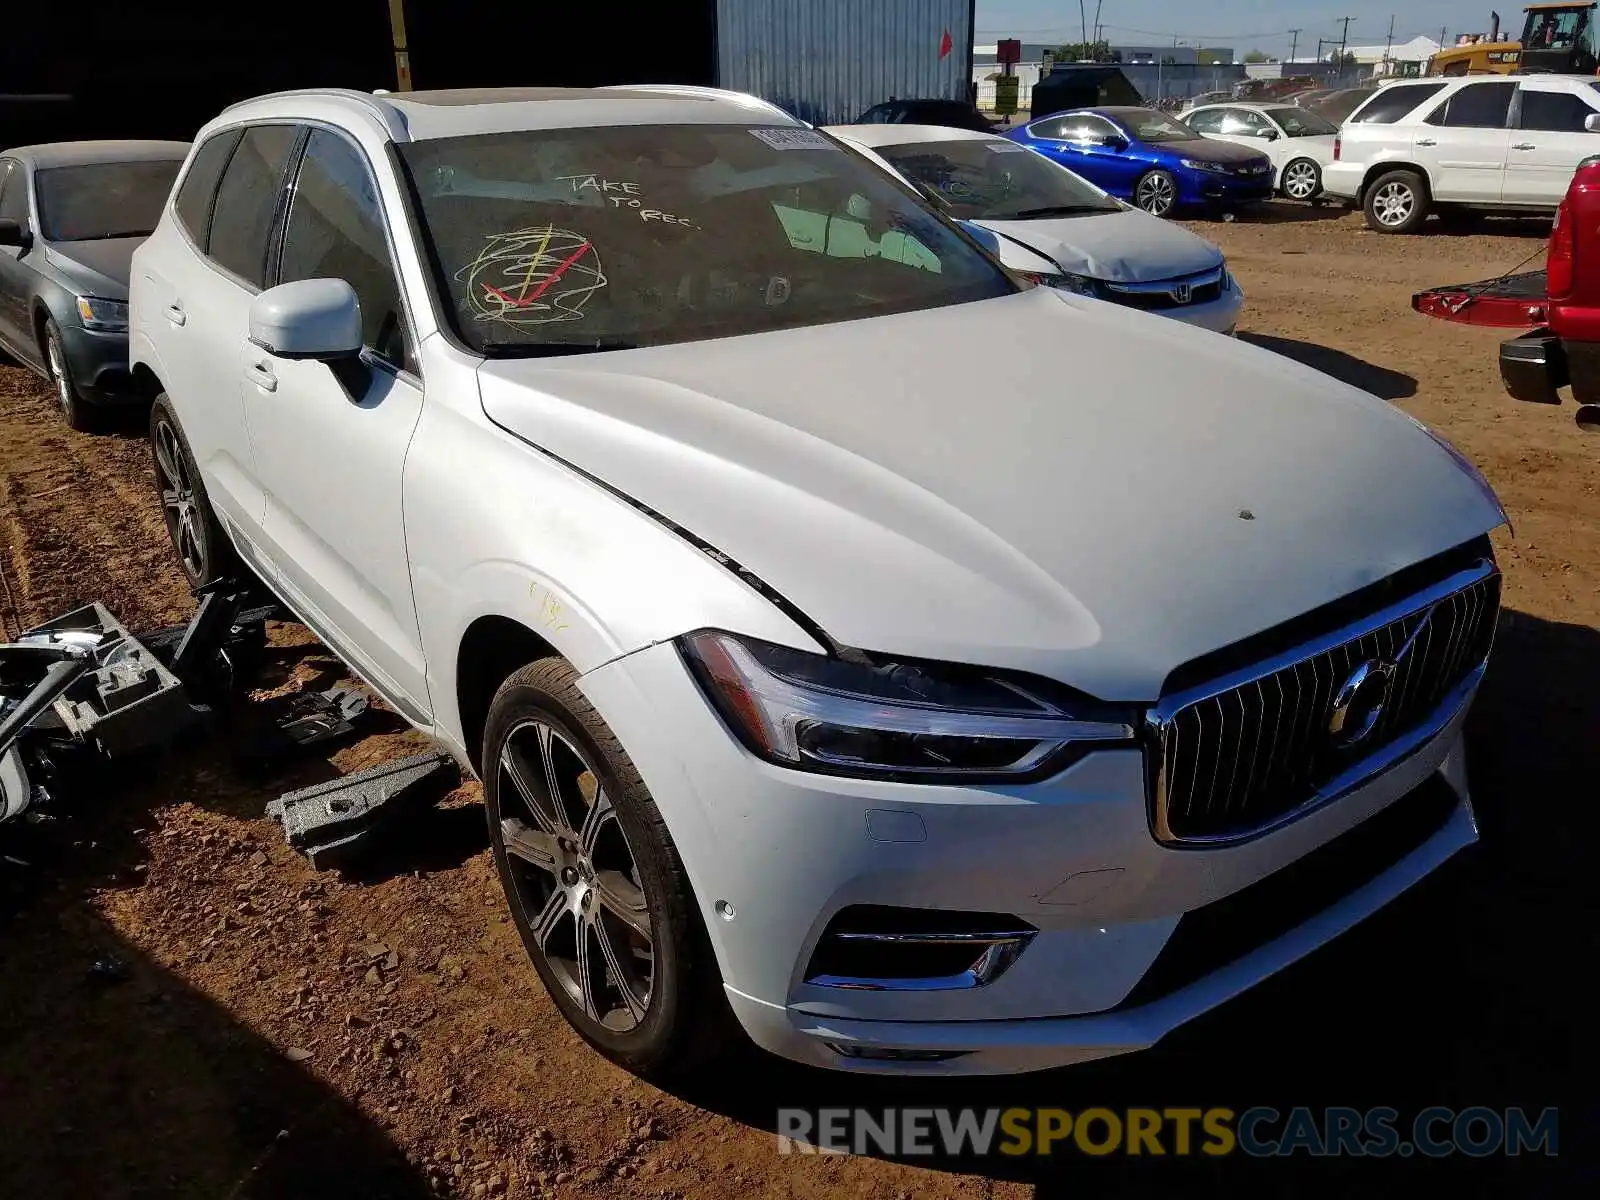 1 Photograph of a damaged car LYV102RL2KB283455 VOLVO XC60 T5 IN 2019